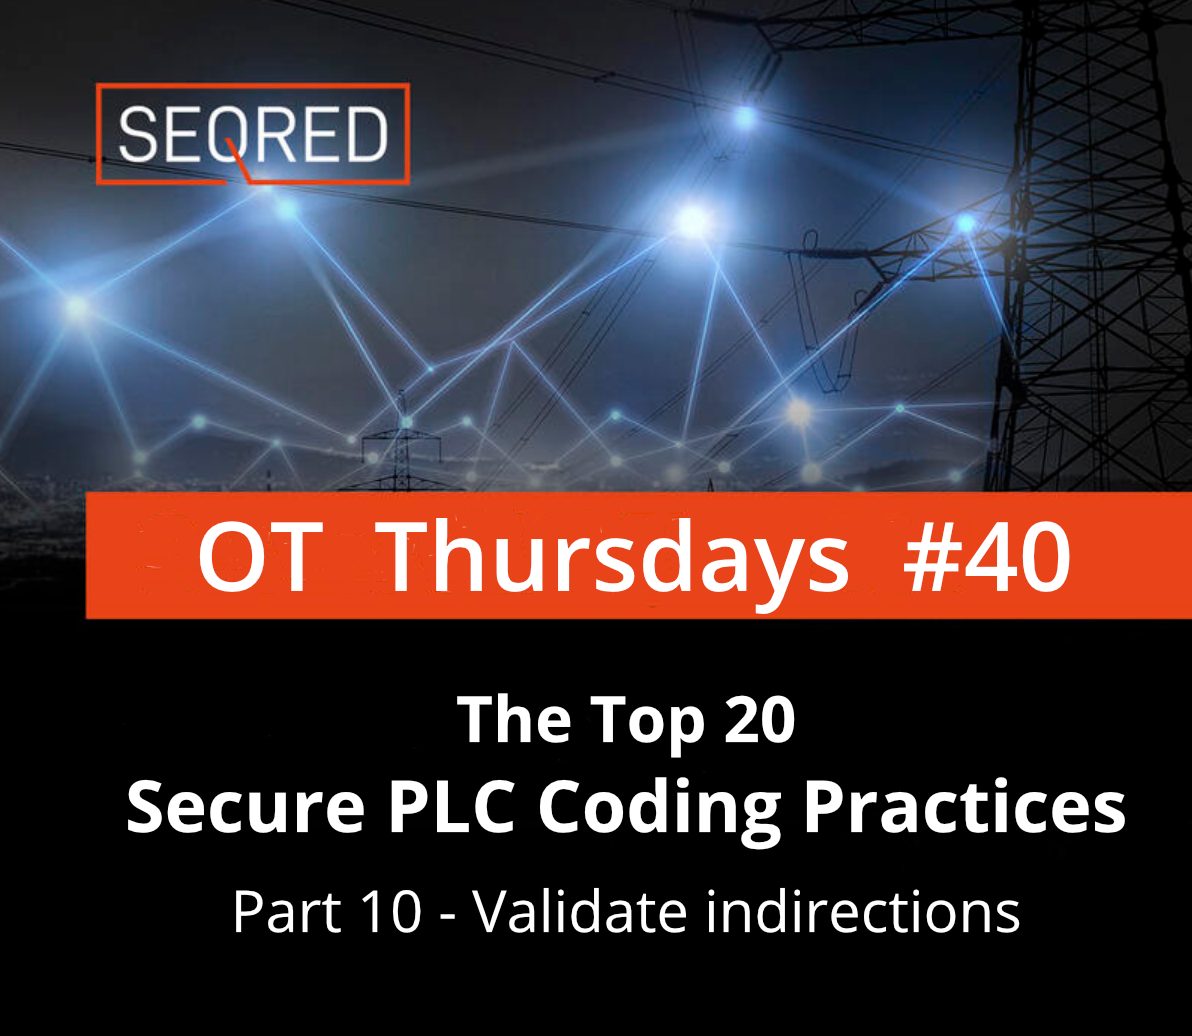 The Top 20 Secure PLC Coding Practices. Part 10 - Validate indirections